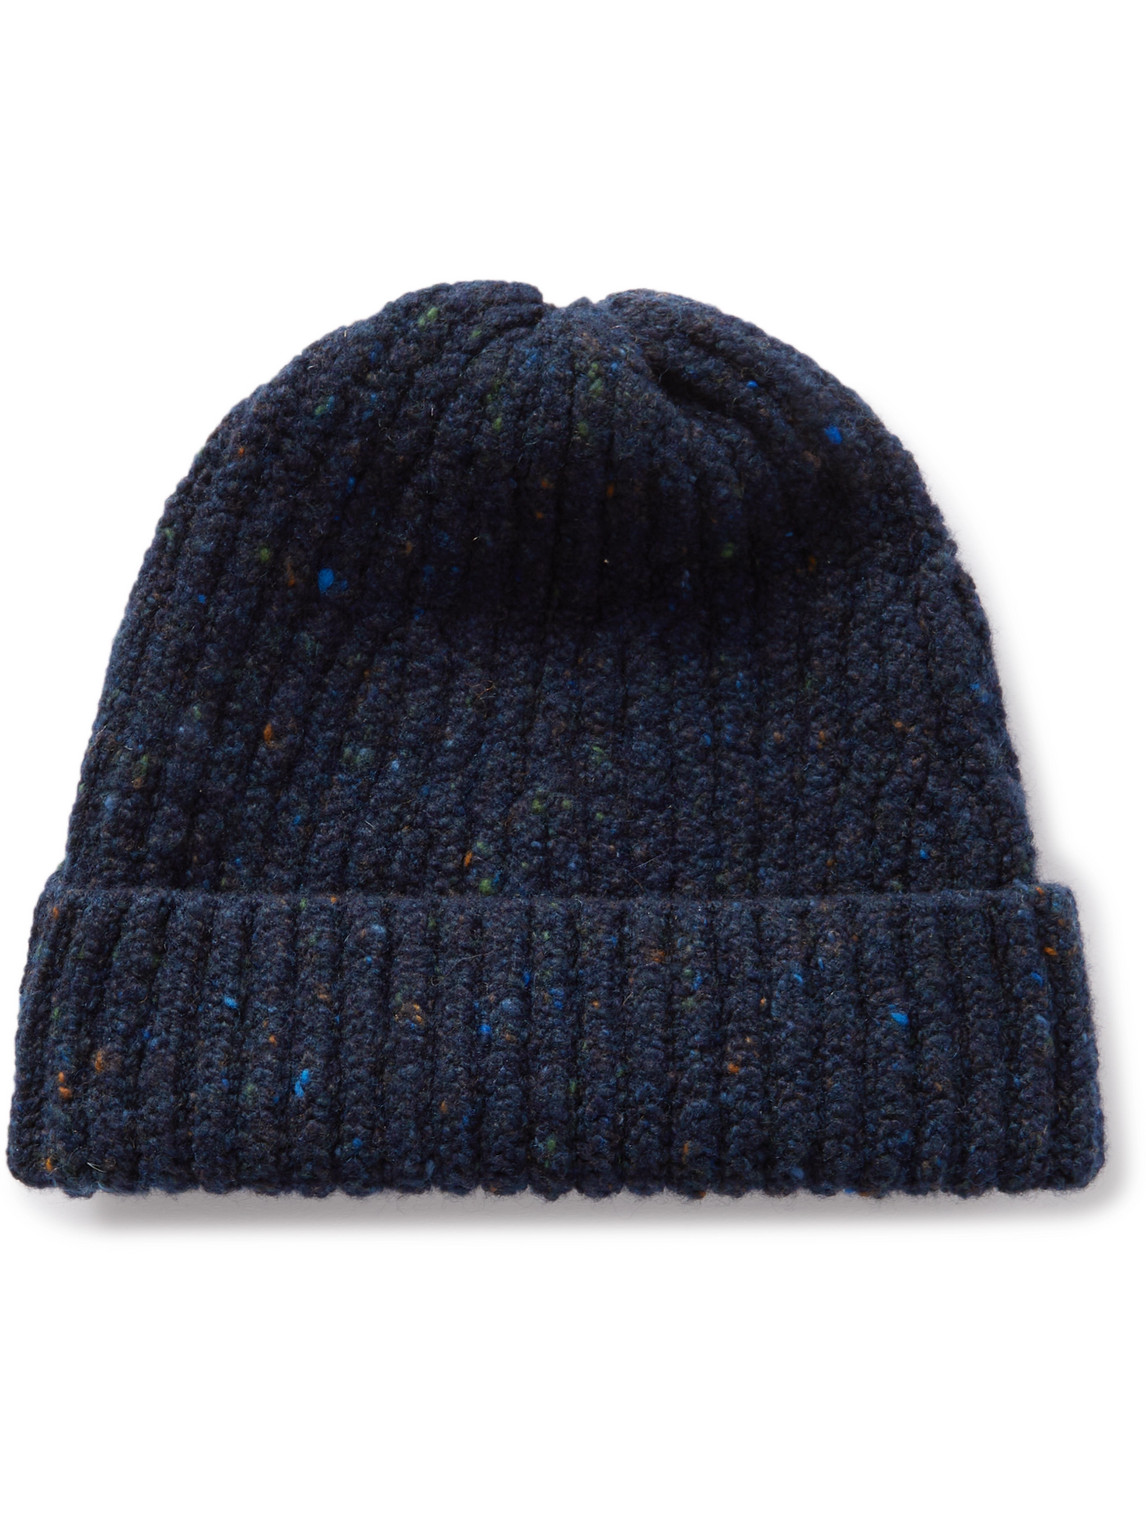 Inis Meáin - Ribbed Merino Wool and Cashmere-Blend Beanie - Men - Blue von Inis Meáin